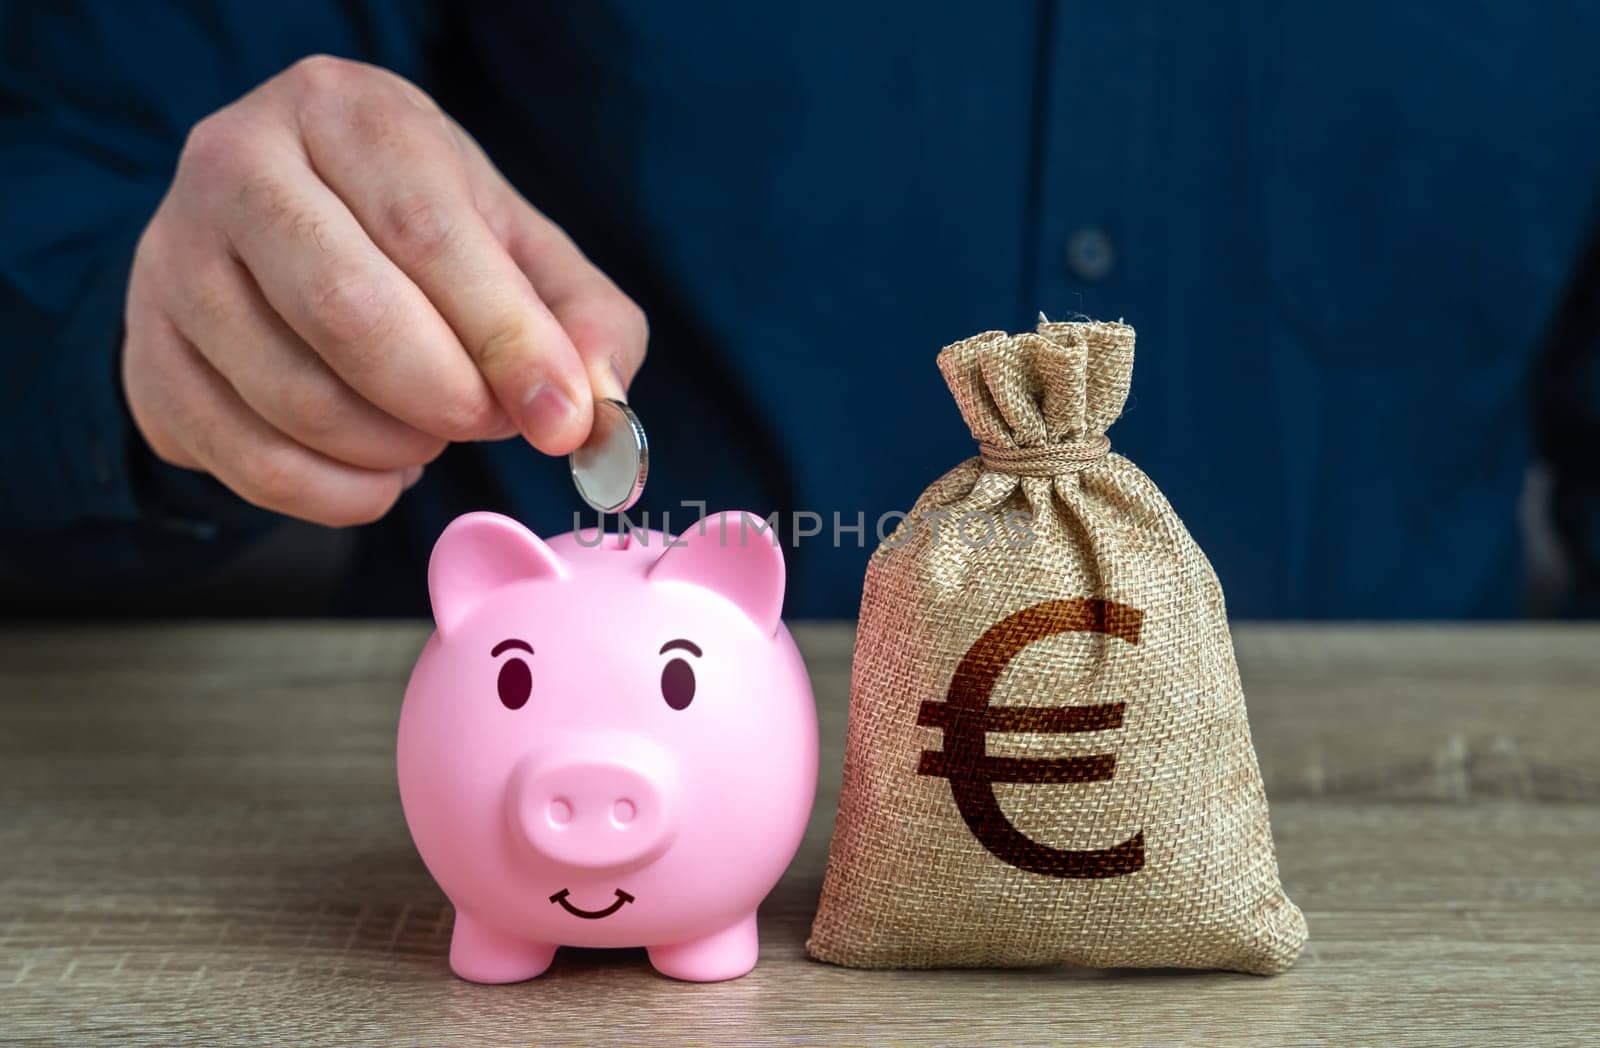 Pig piggy bank and euro money bag. Savings management. Banks and finance. Savings and accumulation of funds from cutting expenses. Investments, fundraising.